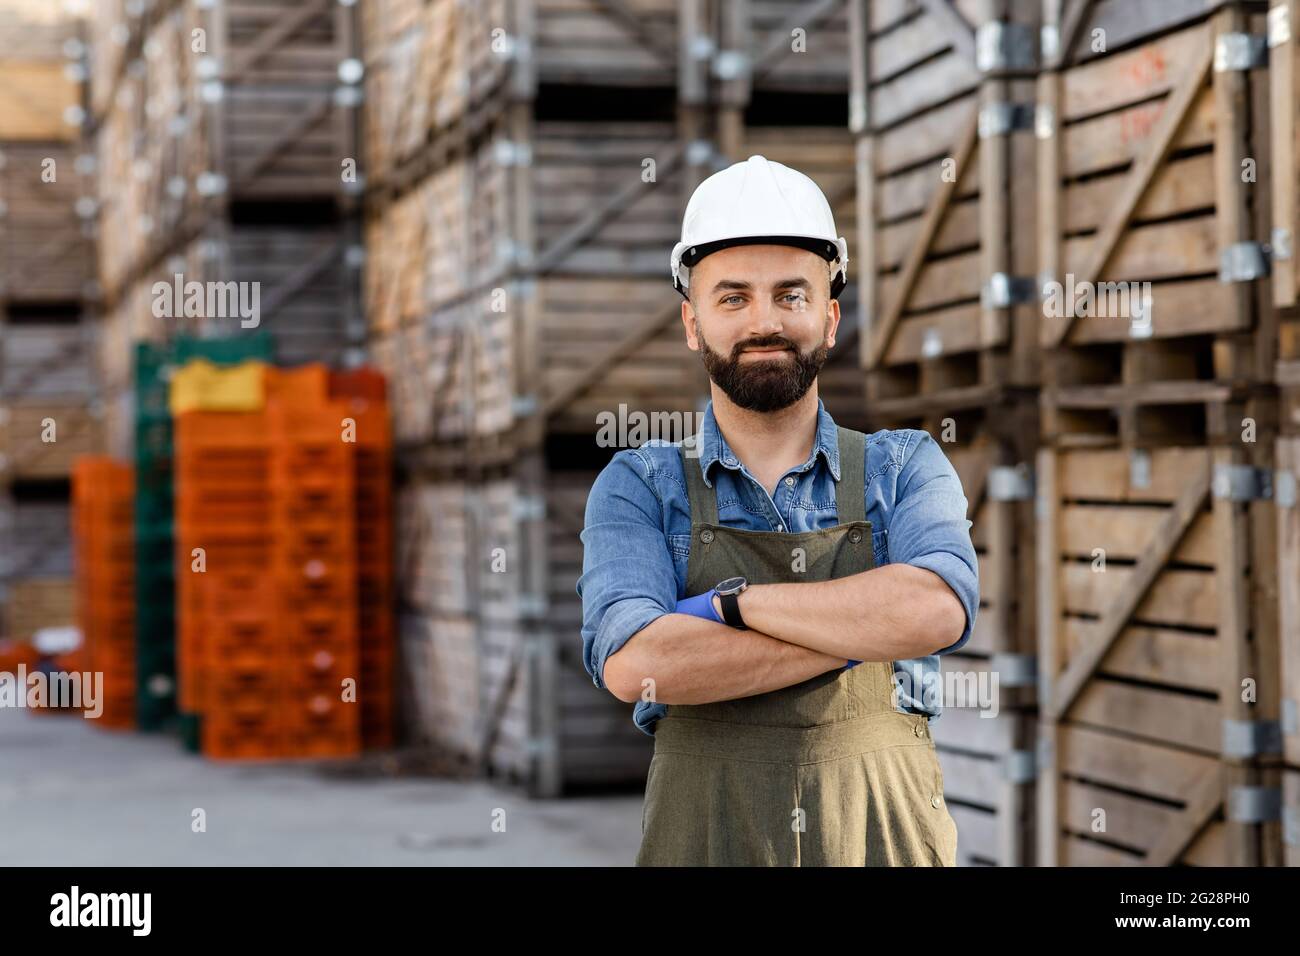 Inspecting products in warehouse, management, distribution and logistics Stock Photo